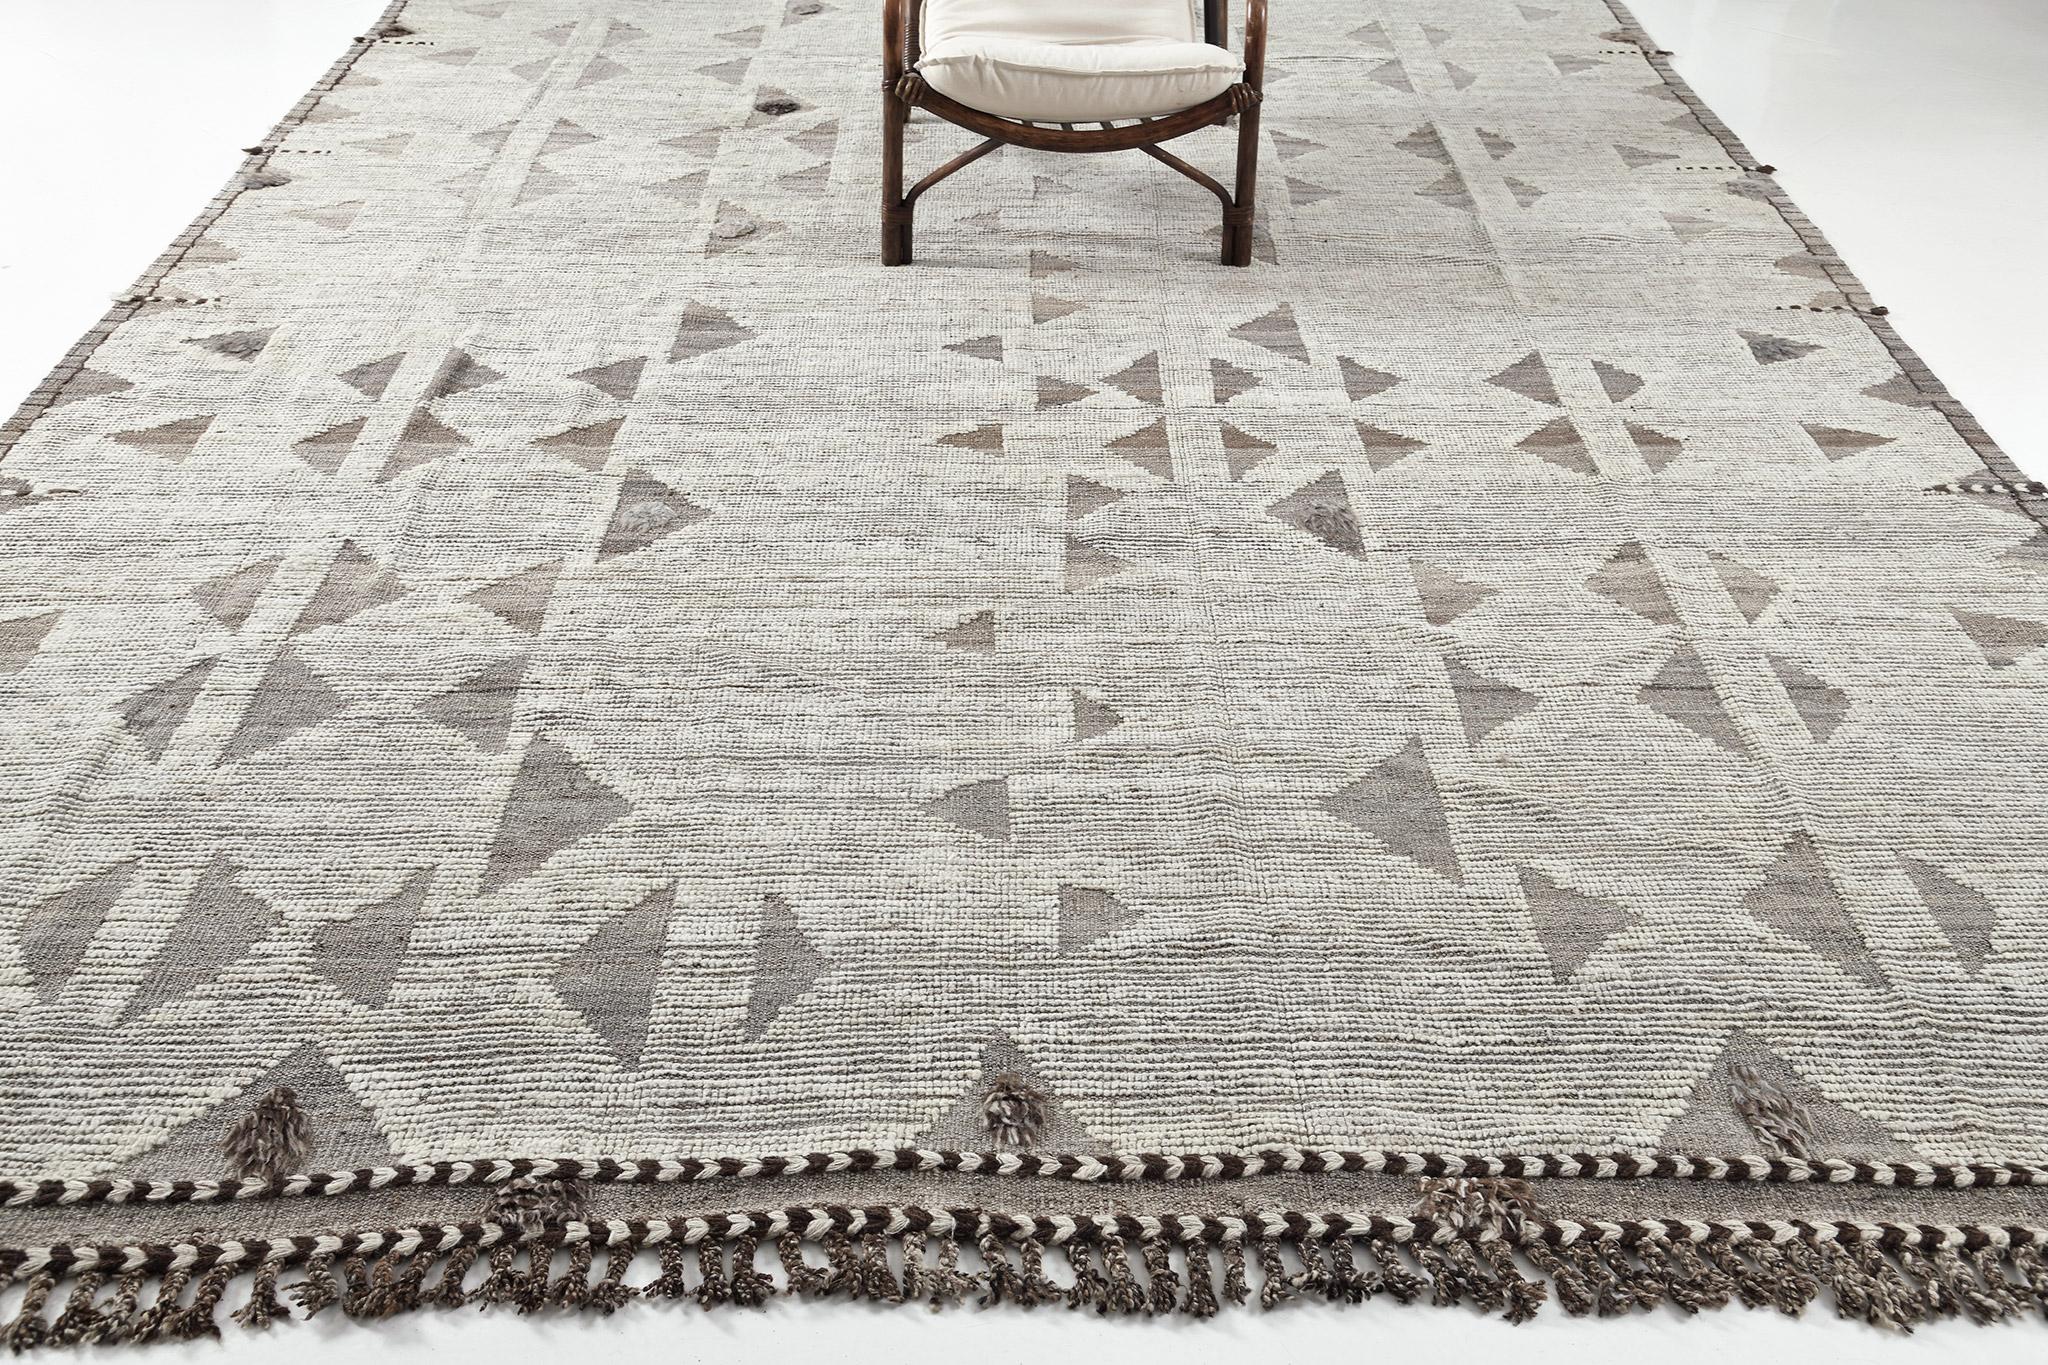 Gimbrala' is a stunning handwoven natural ivory rug with embossed triangle detailing surrounding the perfect gray pile. Beautiful tassels and bordered designs add a timely and one of a kind essence for the modern design world. Haute Bohemian